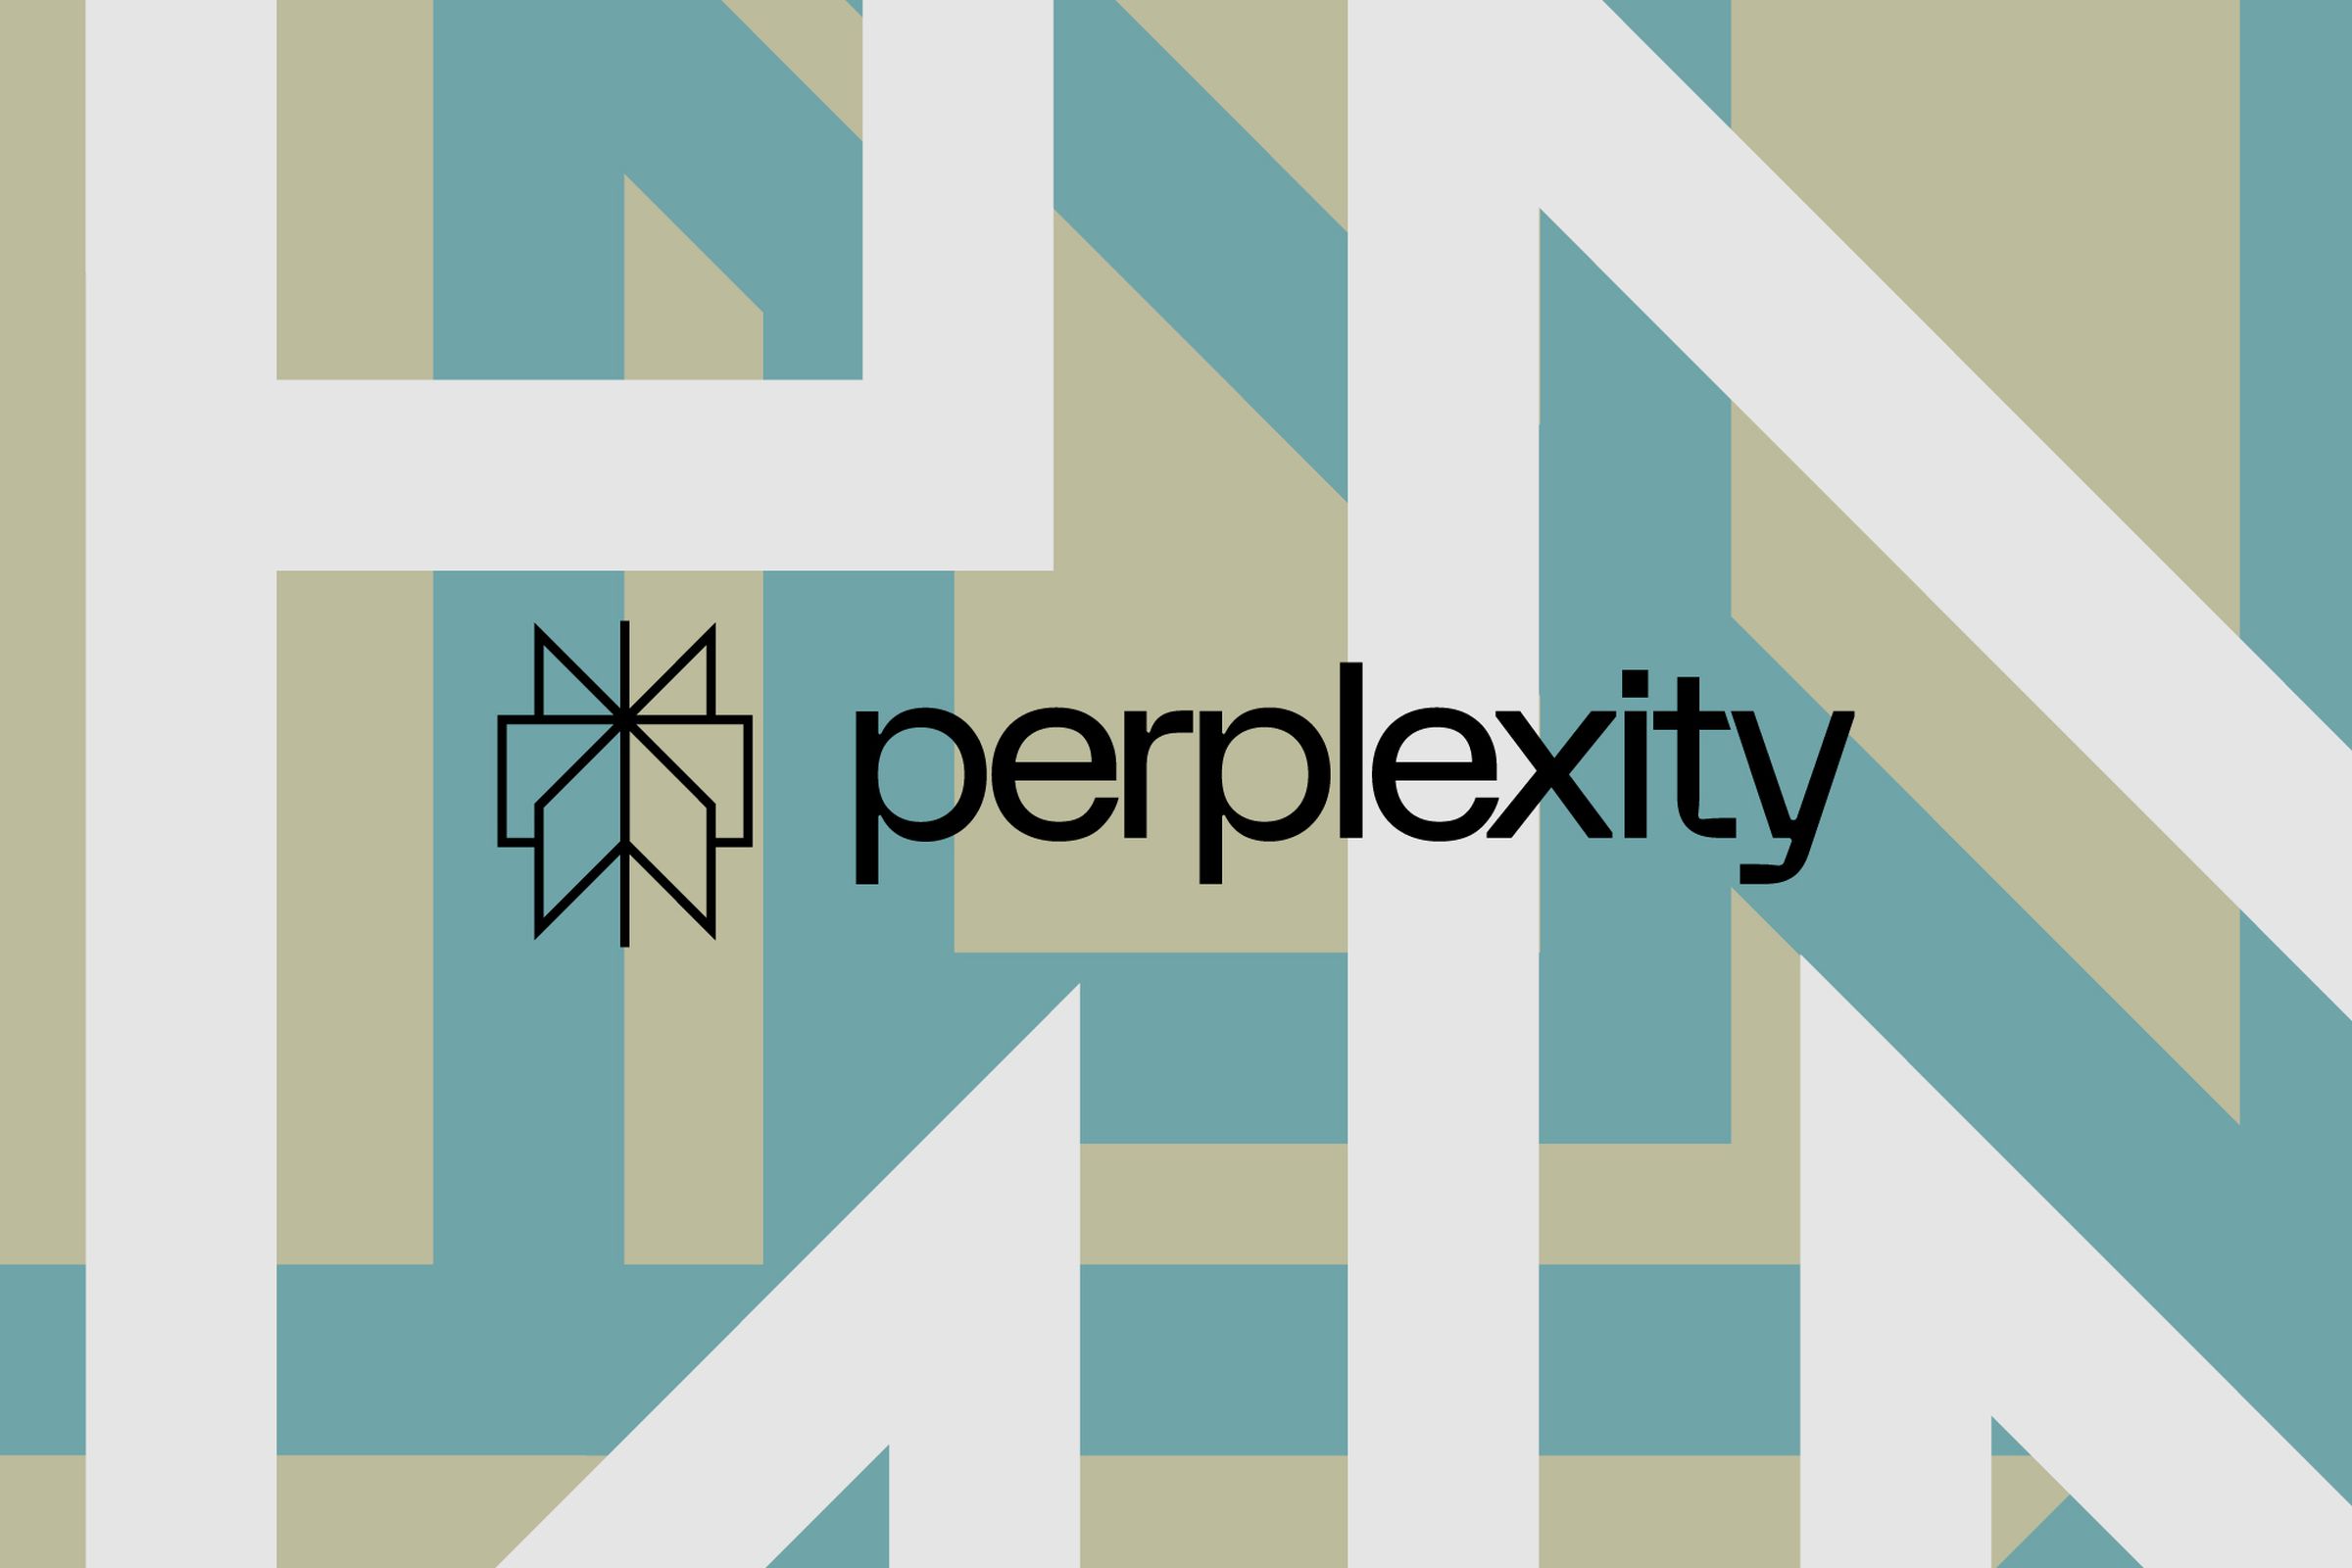 Vector collage of the Perplexity logo.